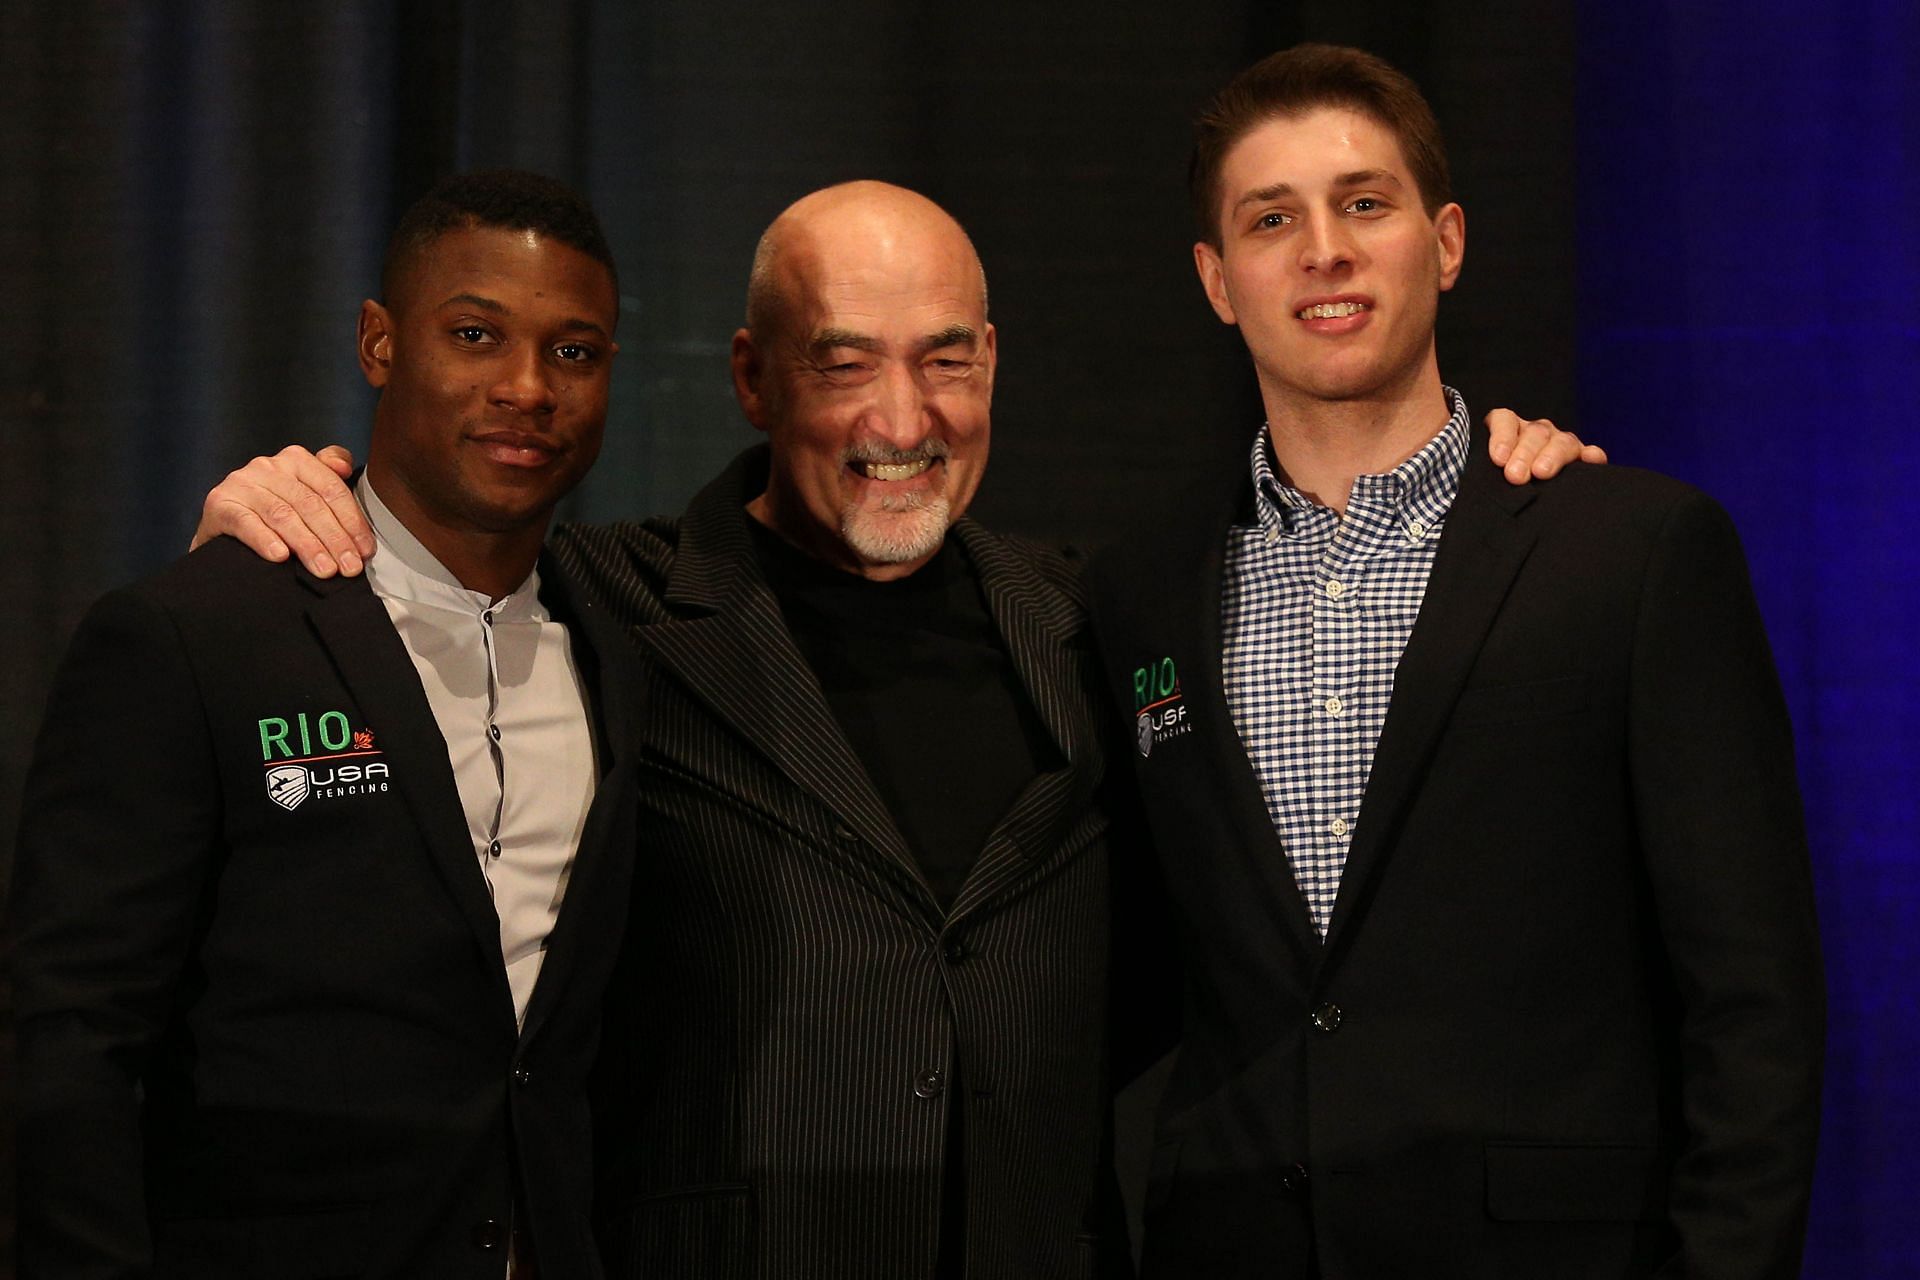 US Men&#039;s National Saber Fencing Coach Zoran Tulum (center) poses with US Olympic Saber fencers Eli Dershwitz (R) and Daryl Homer (L) [File Photo]